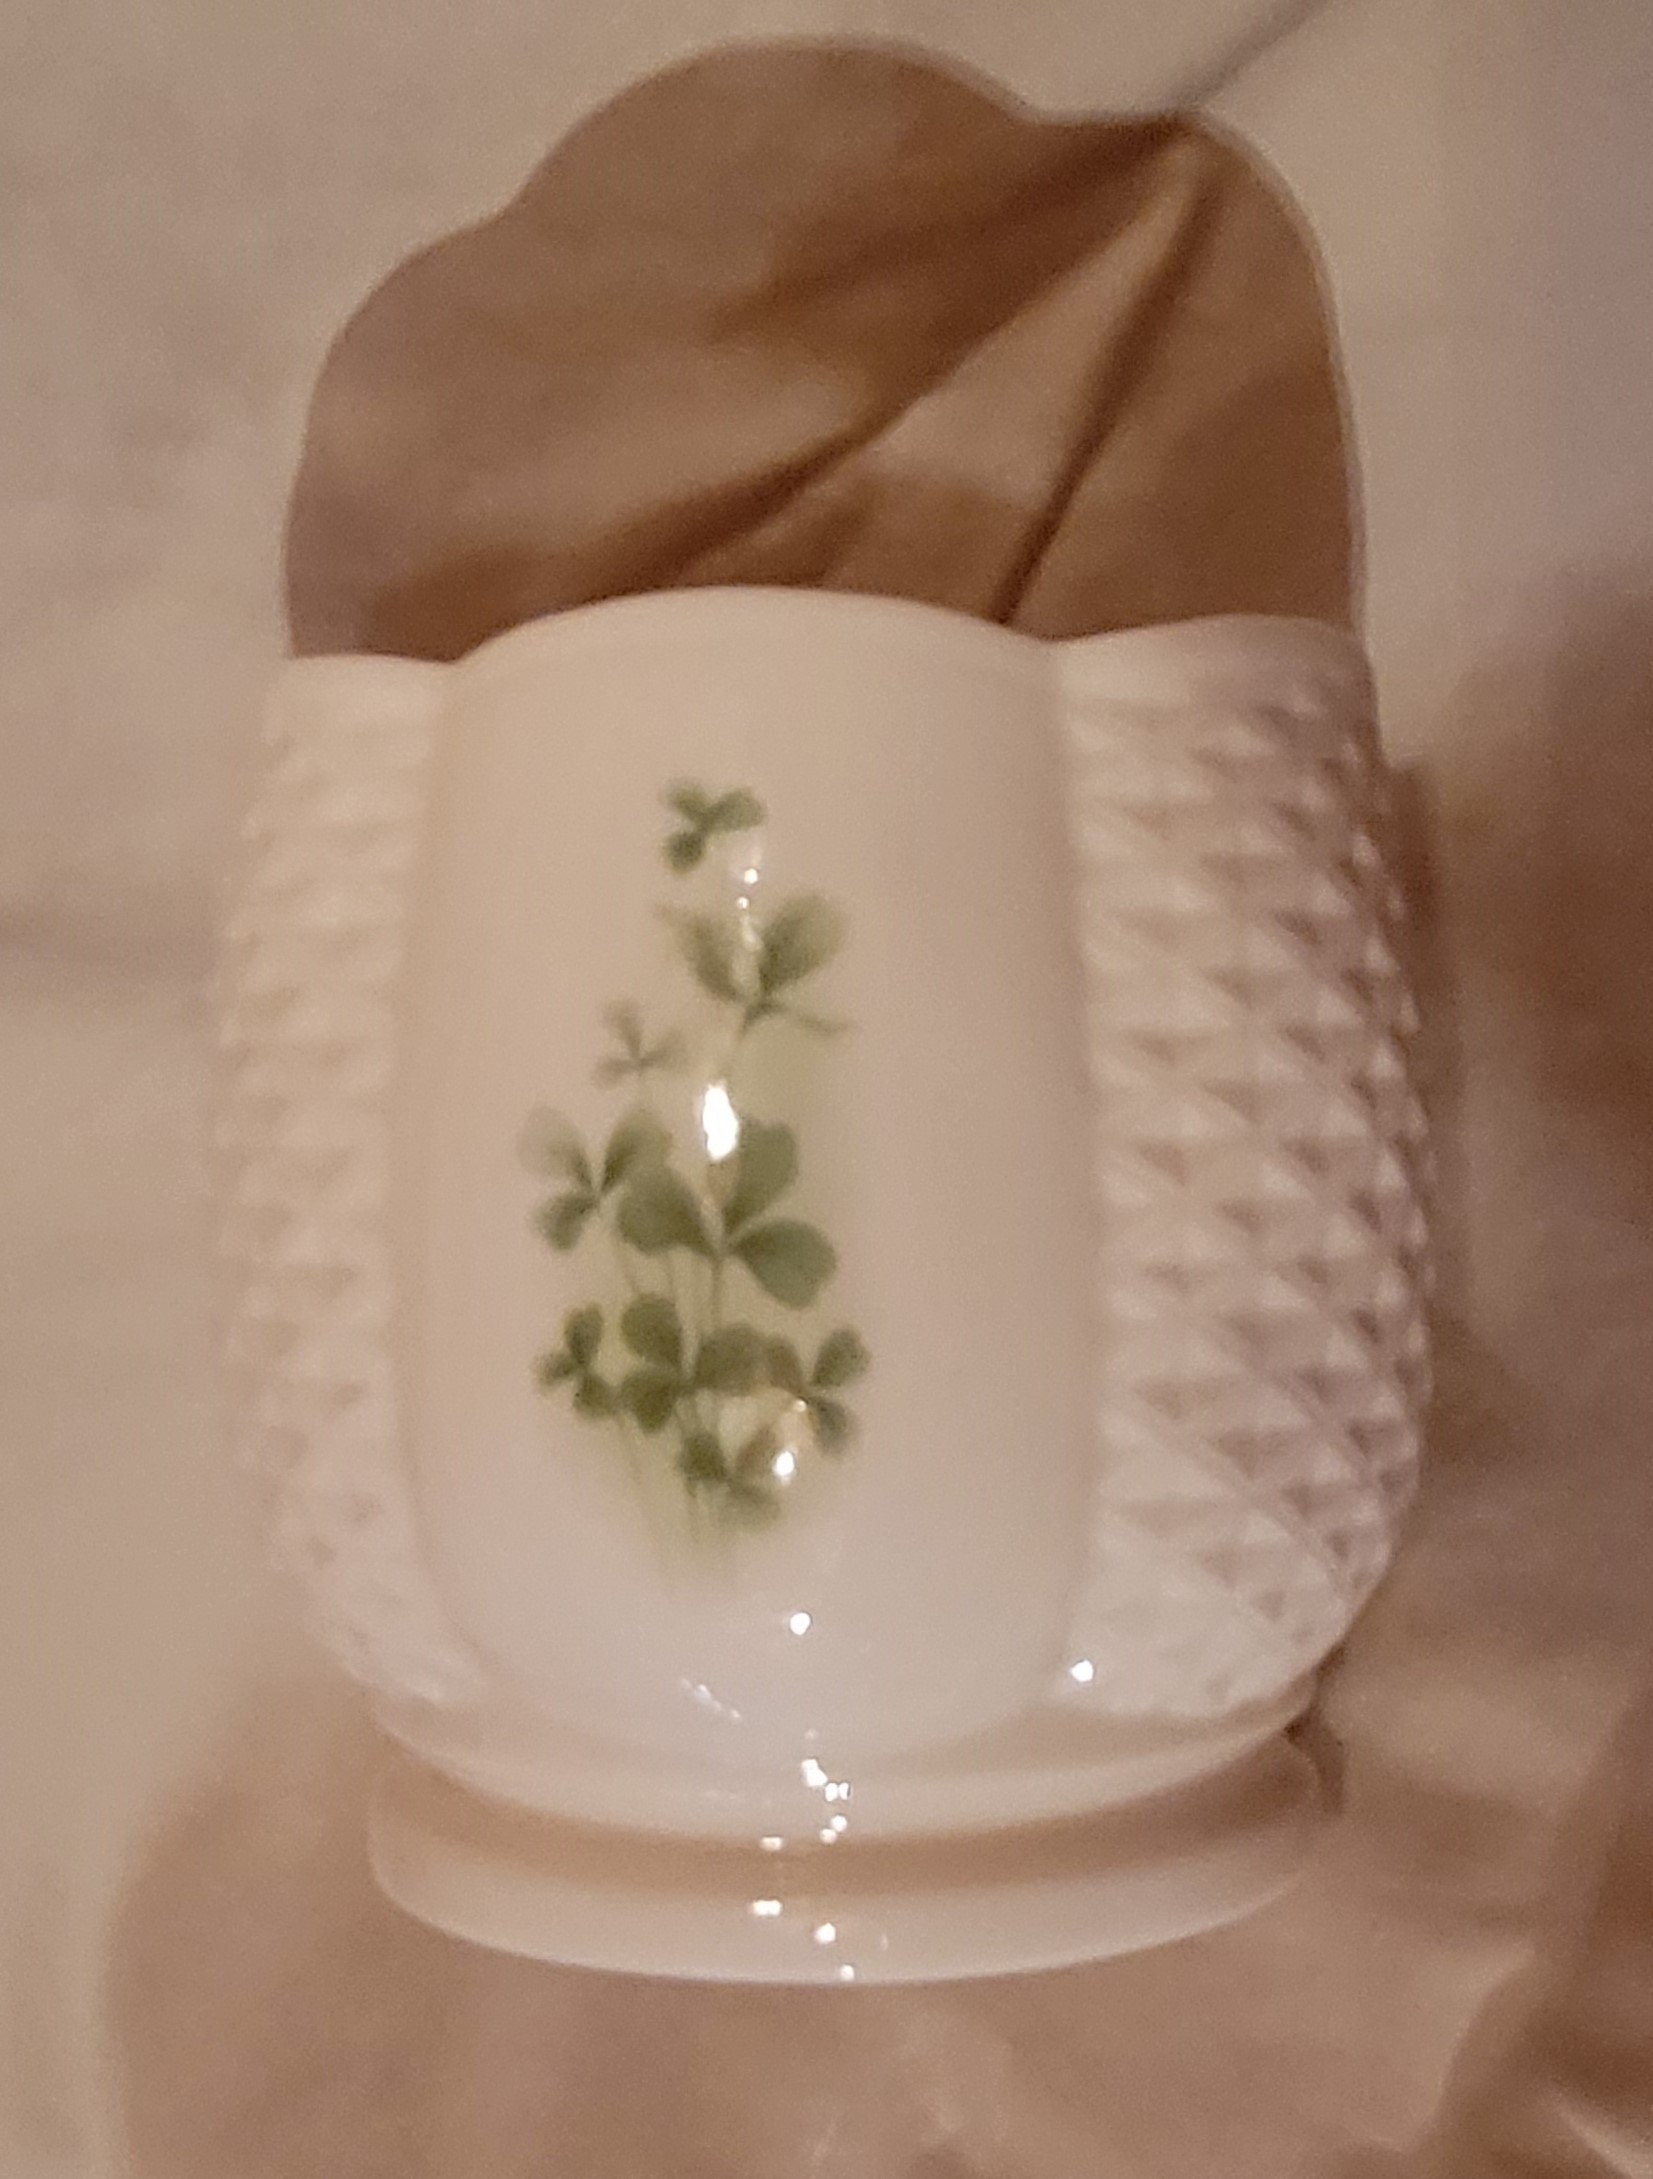 Irish parian donegal for sale  